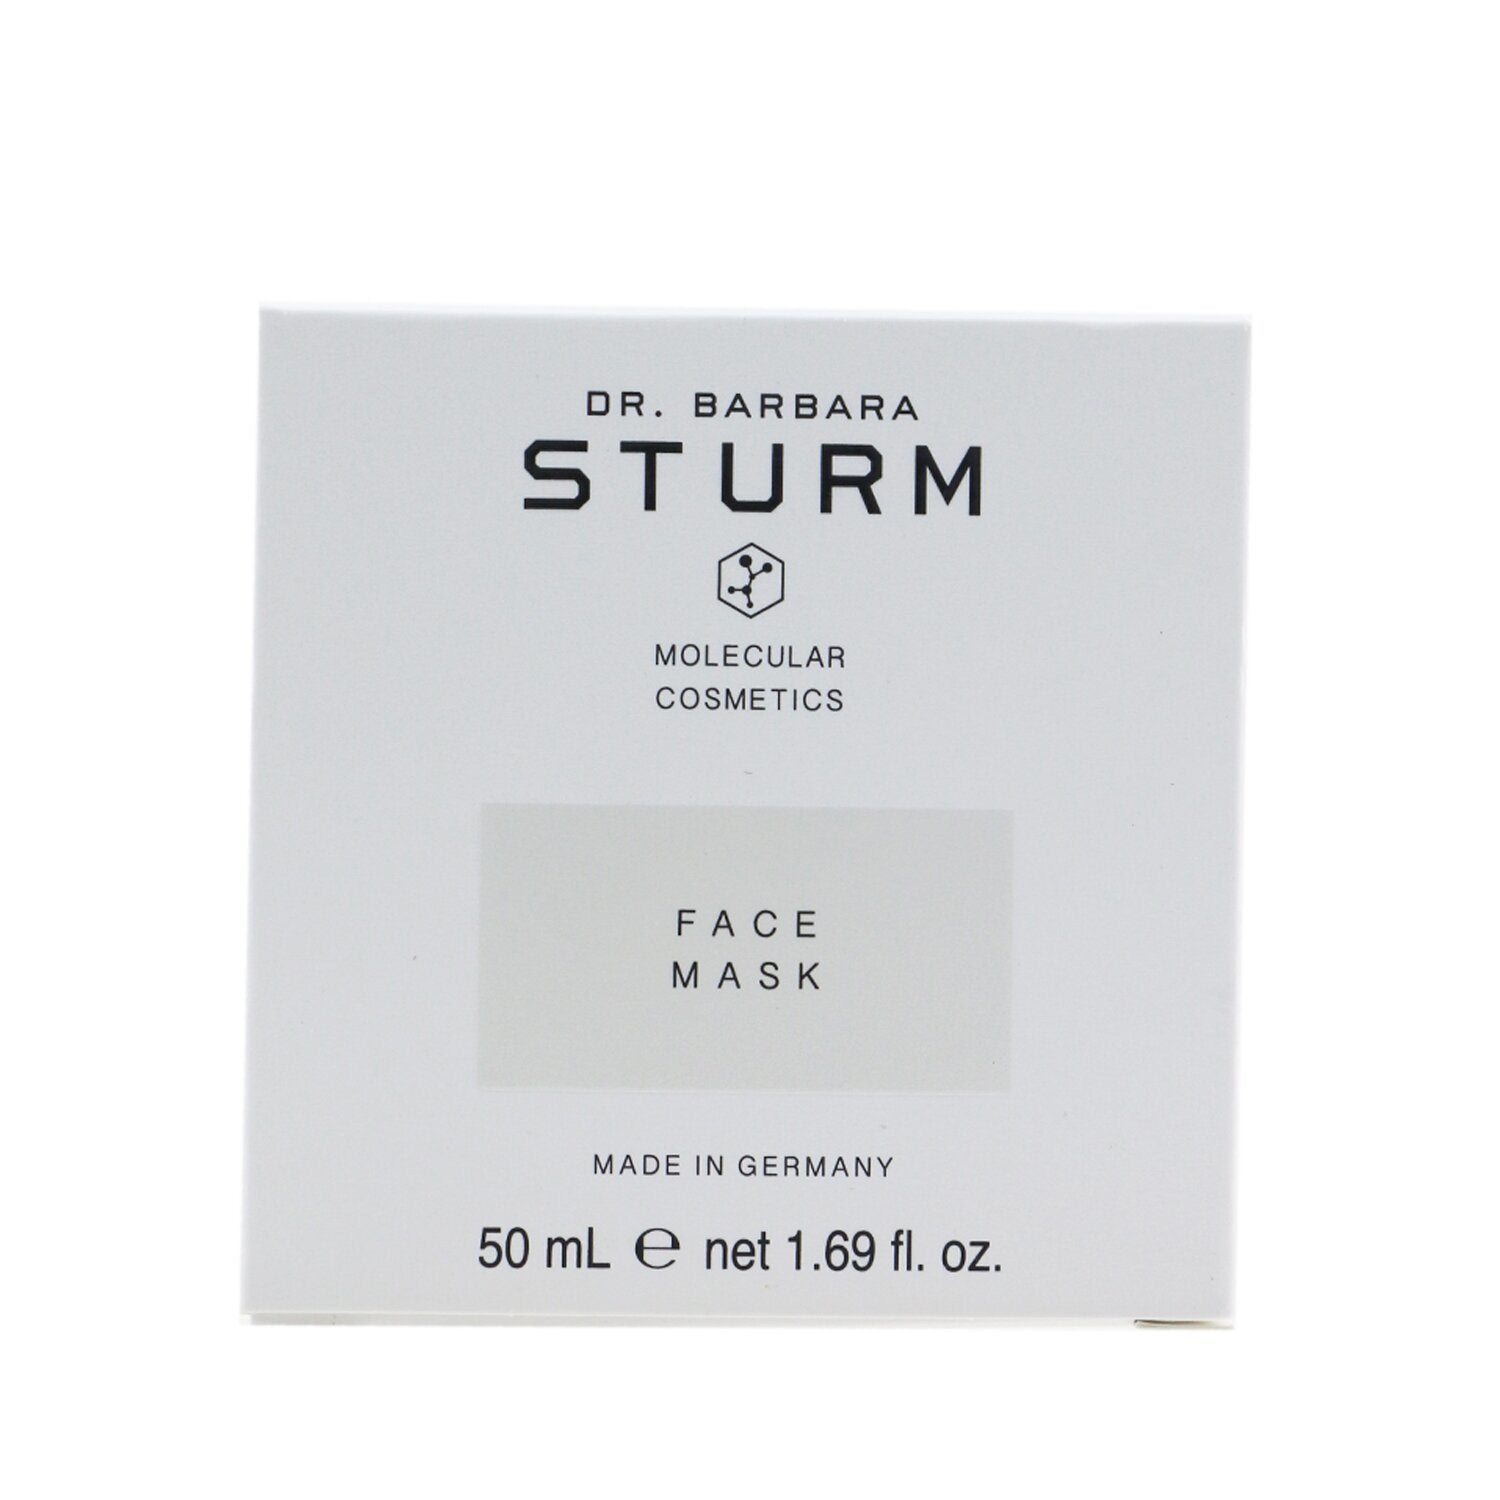 A DR. BARBARA STURM - Face Mask 33773/402160 50ml/1.69oz container with a white label next to a gray and white application brush, set against a white background.